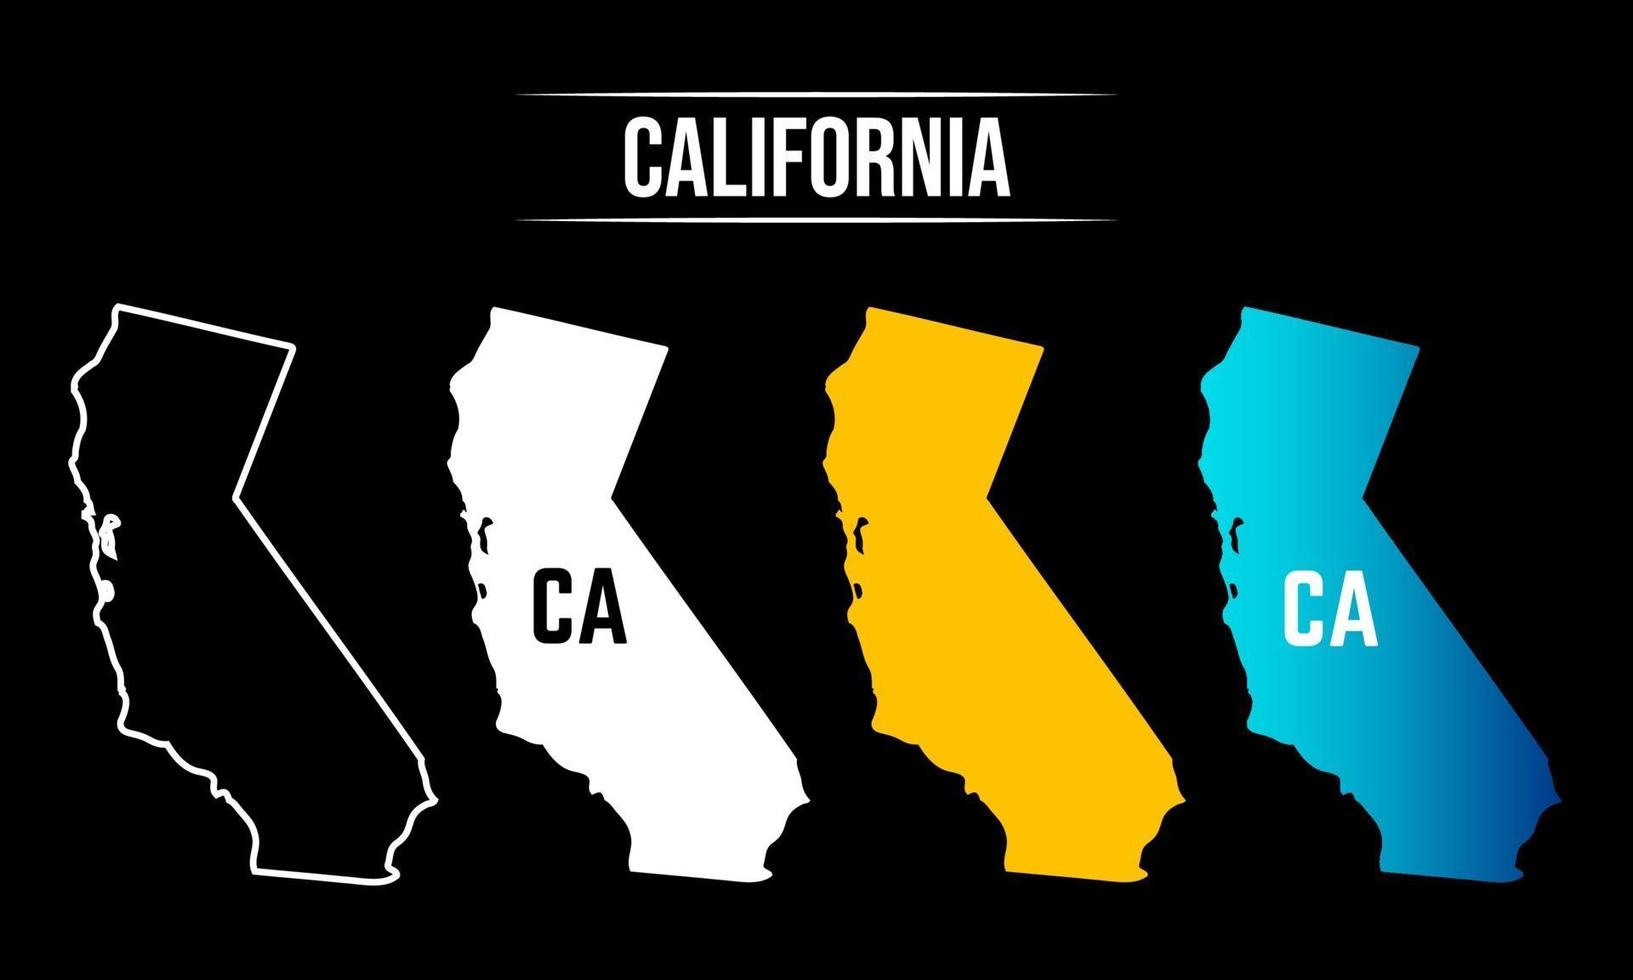 Abstract California State Map Design vector